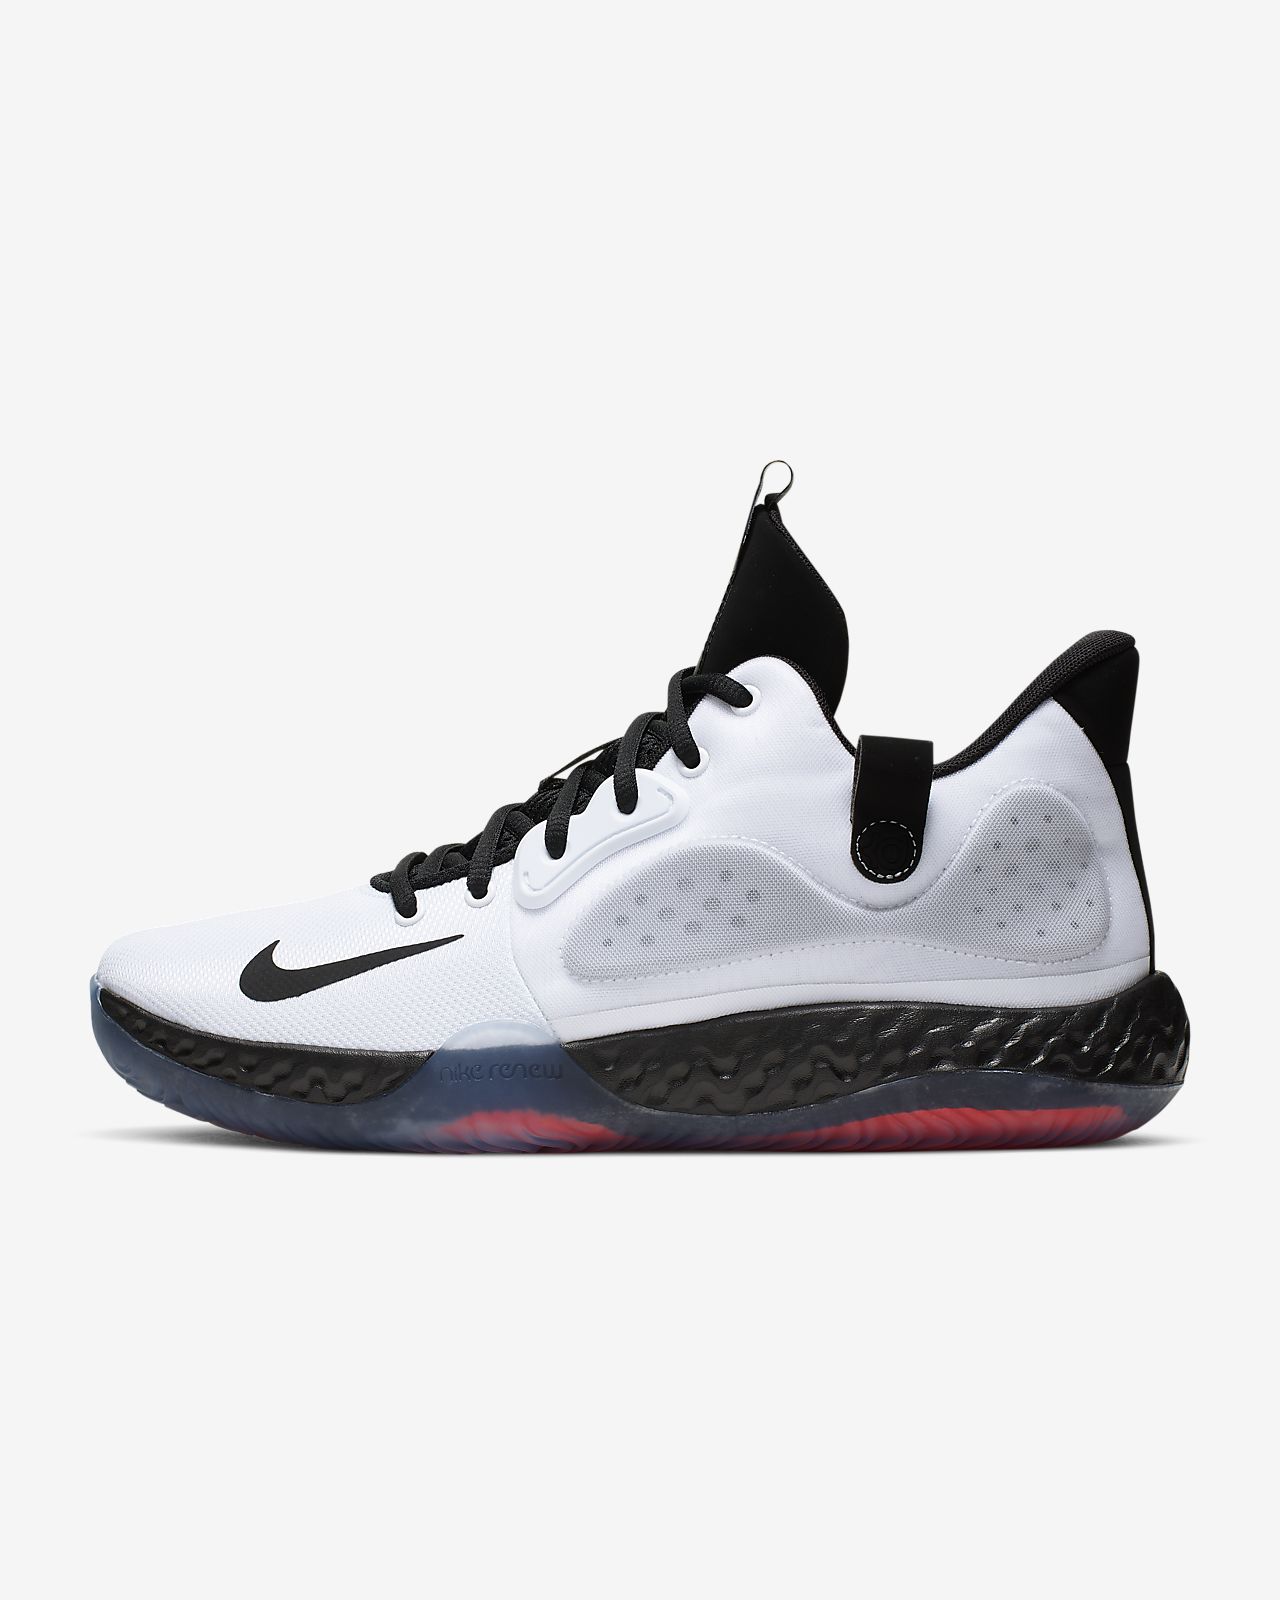 kd trey 5 i Kevin Durant shoes on sale